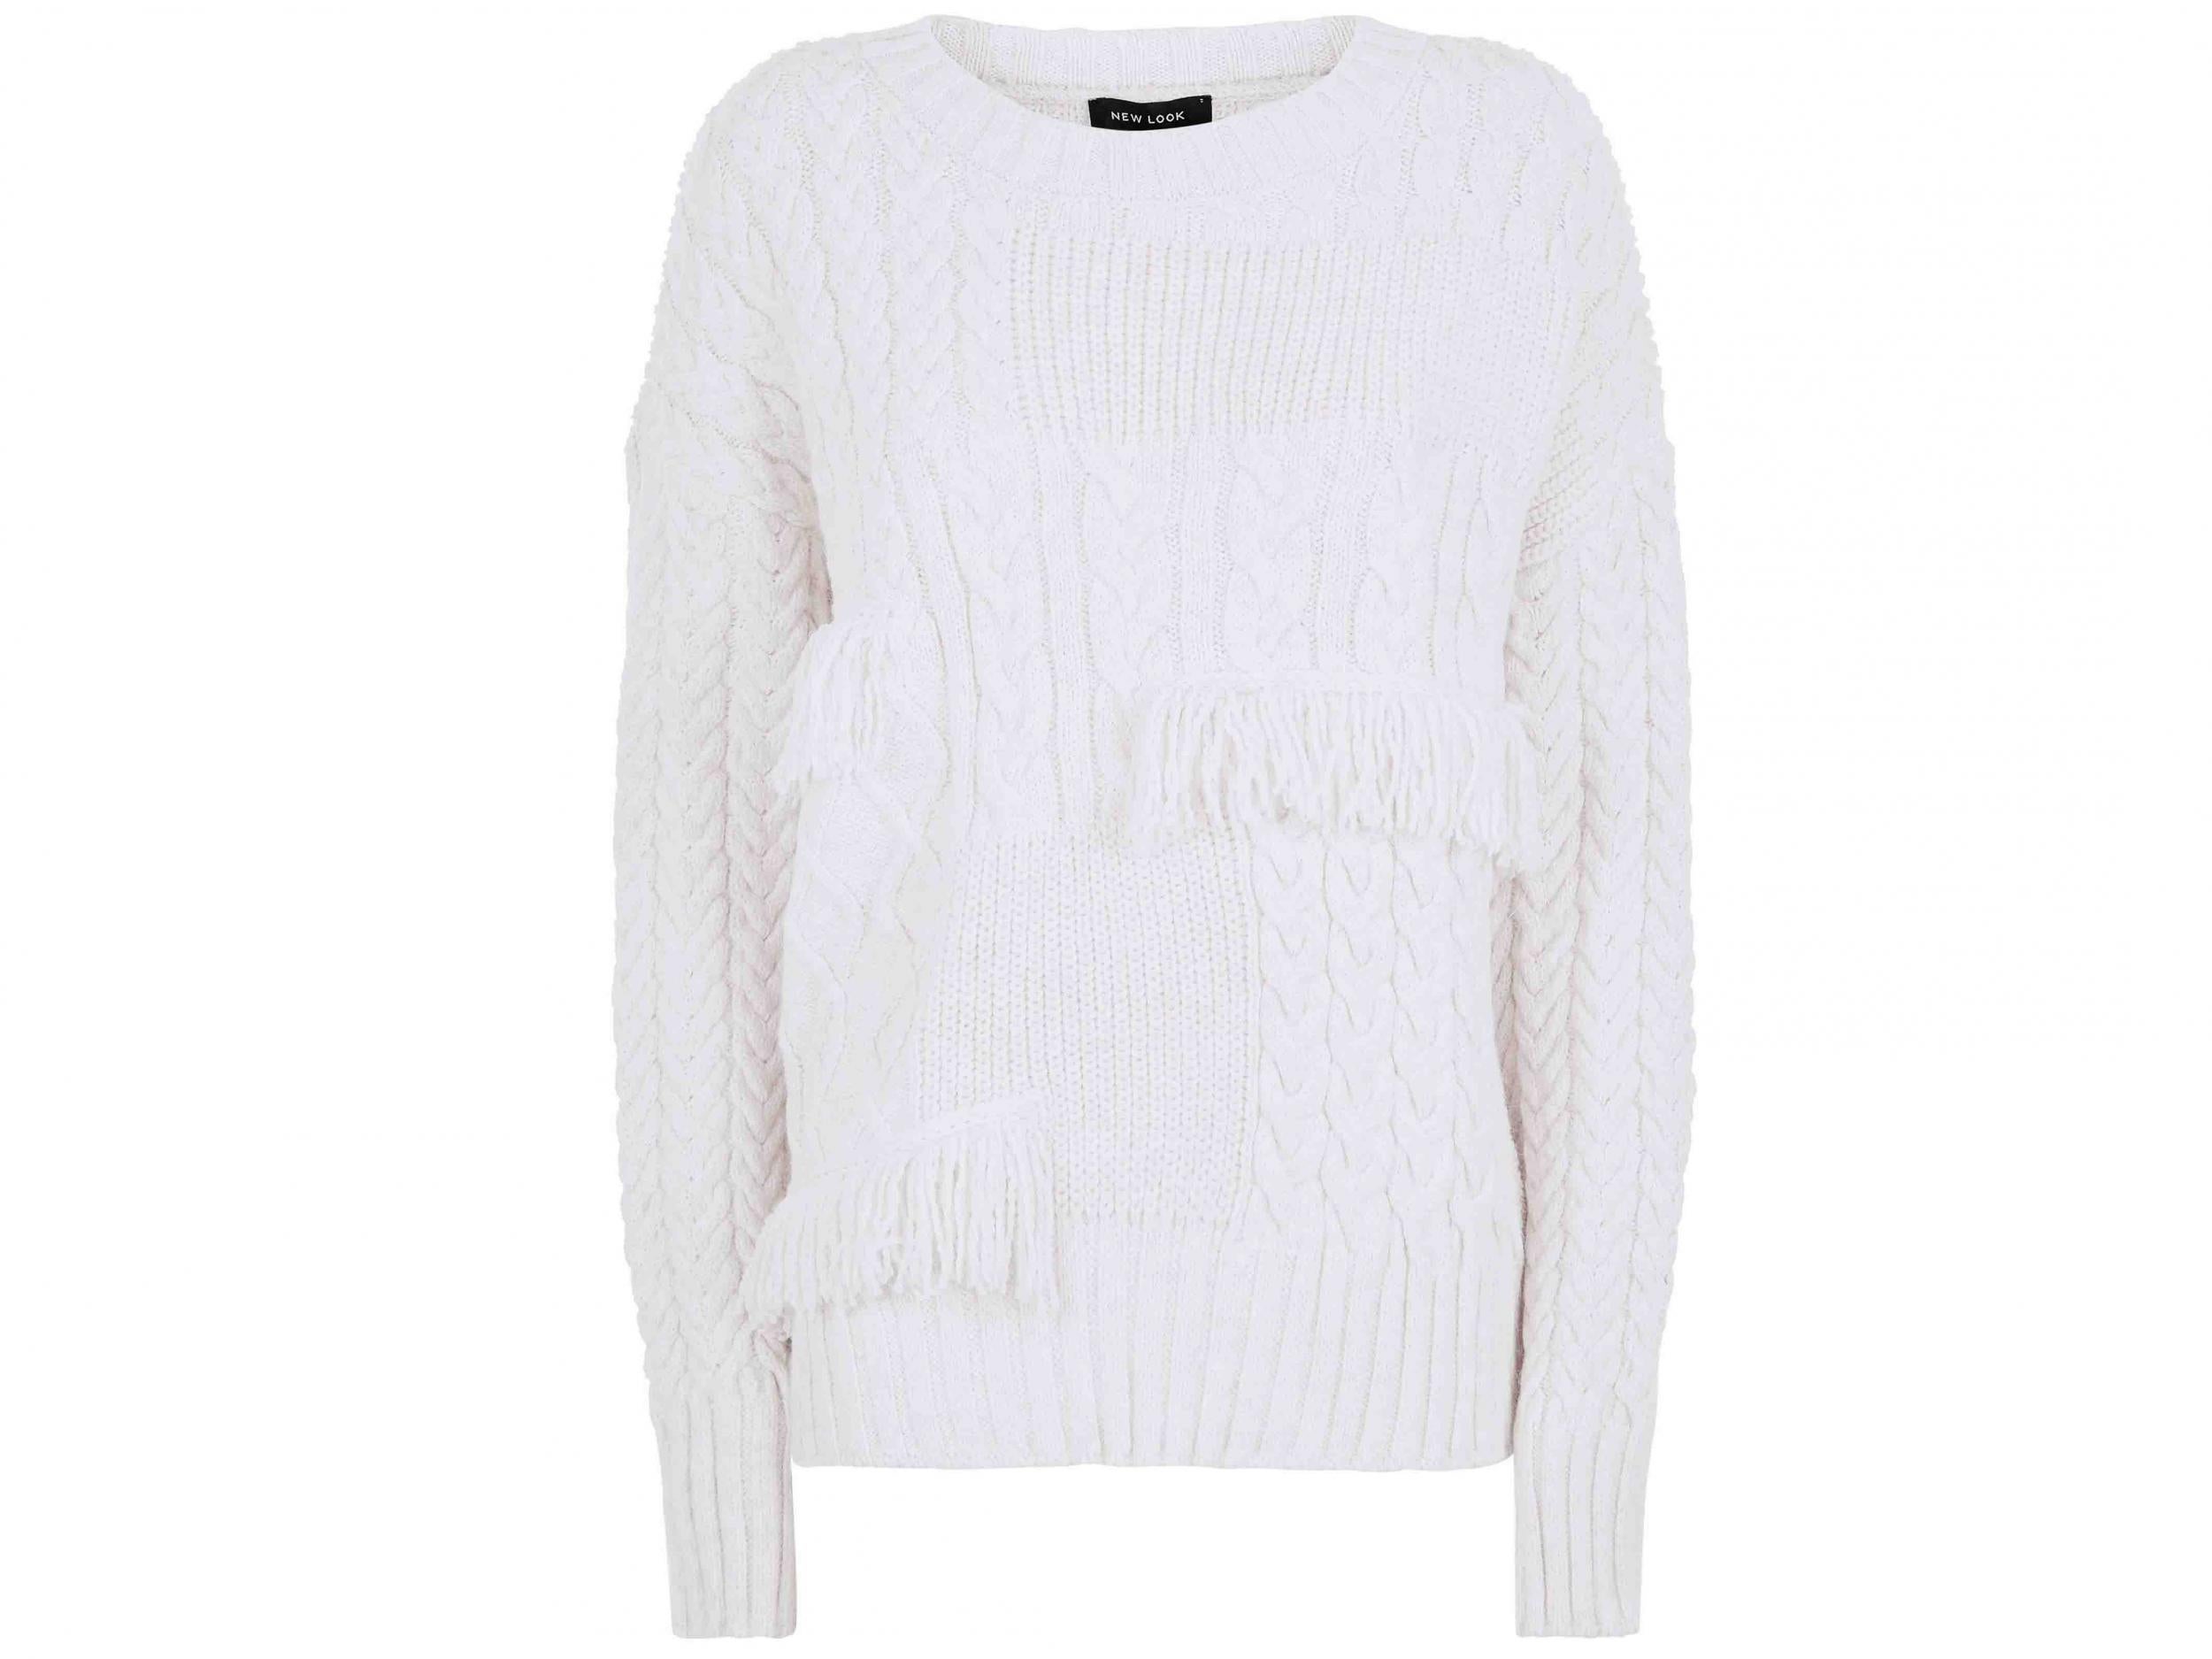 Cream Cable Knit Fringe Trim Jumper, £29.99, New Look